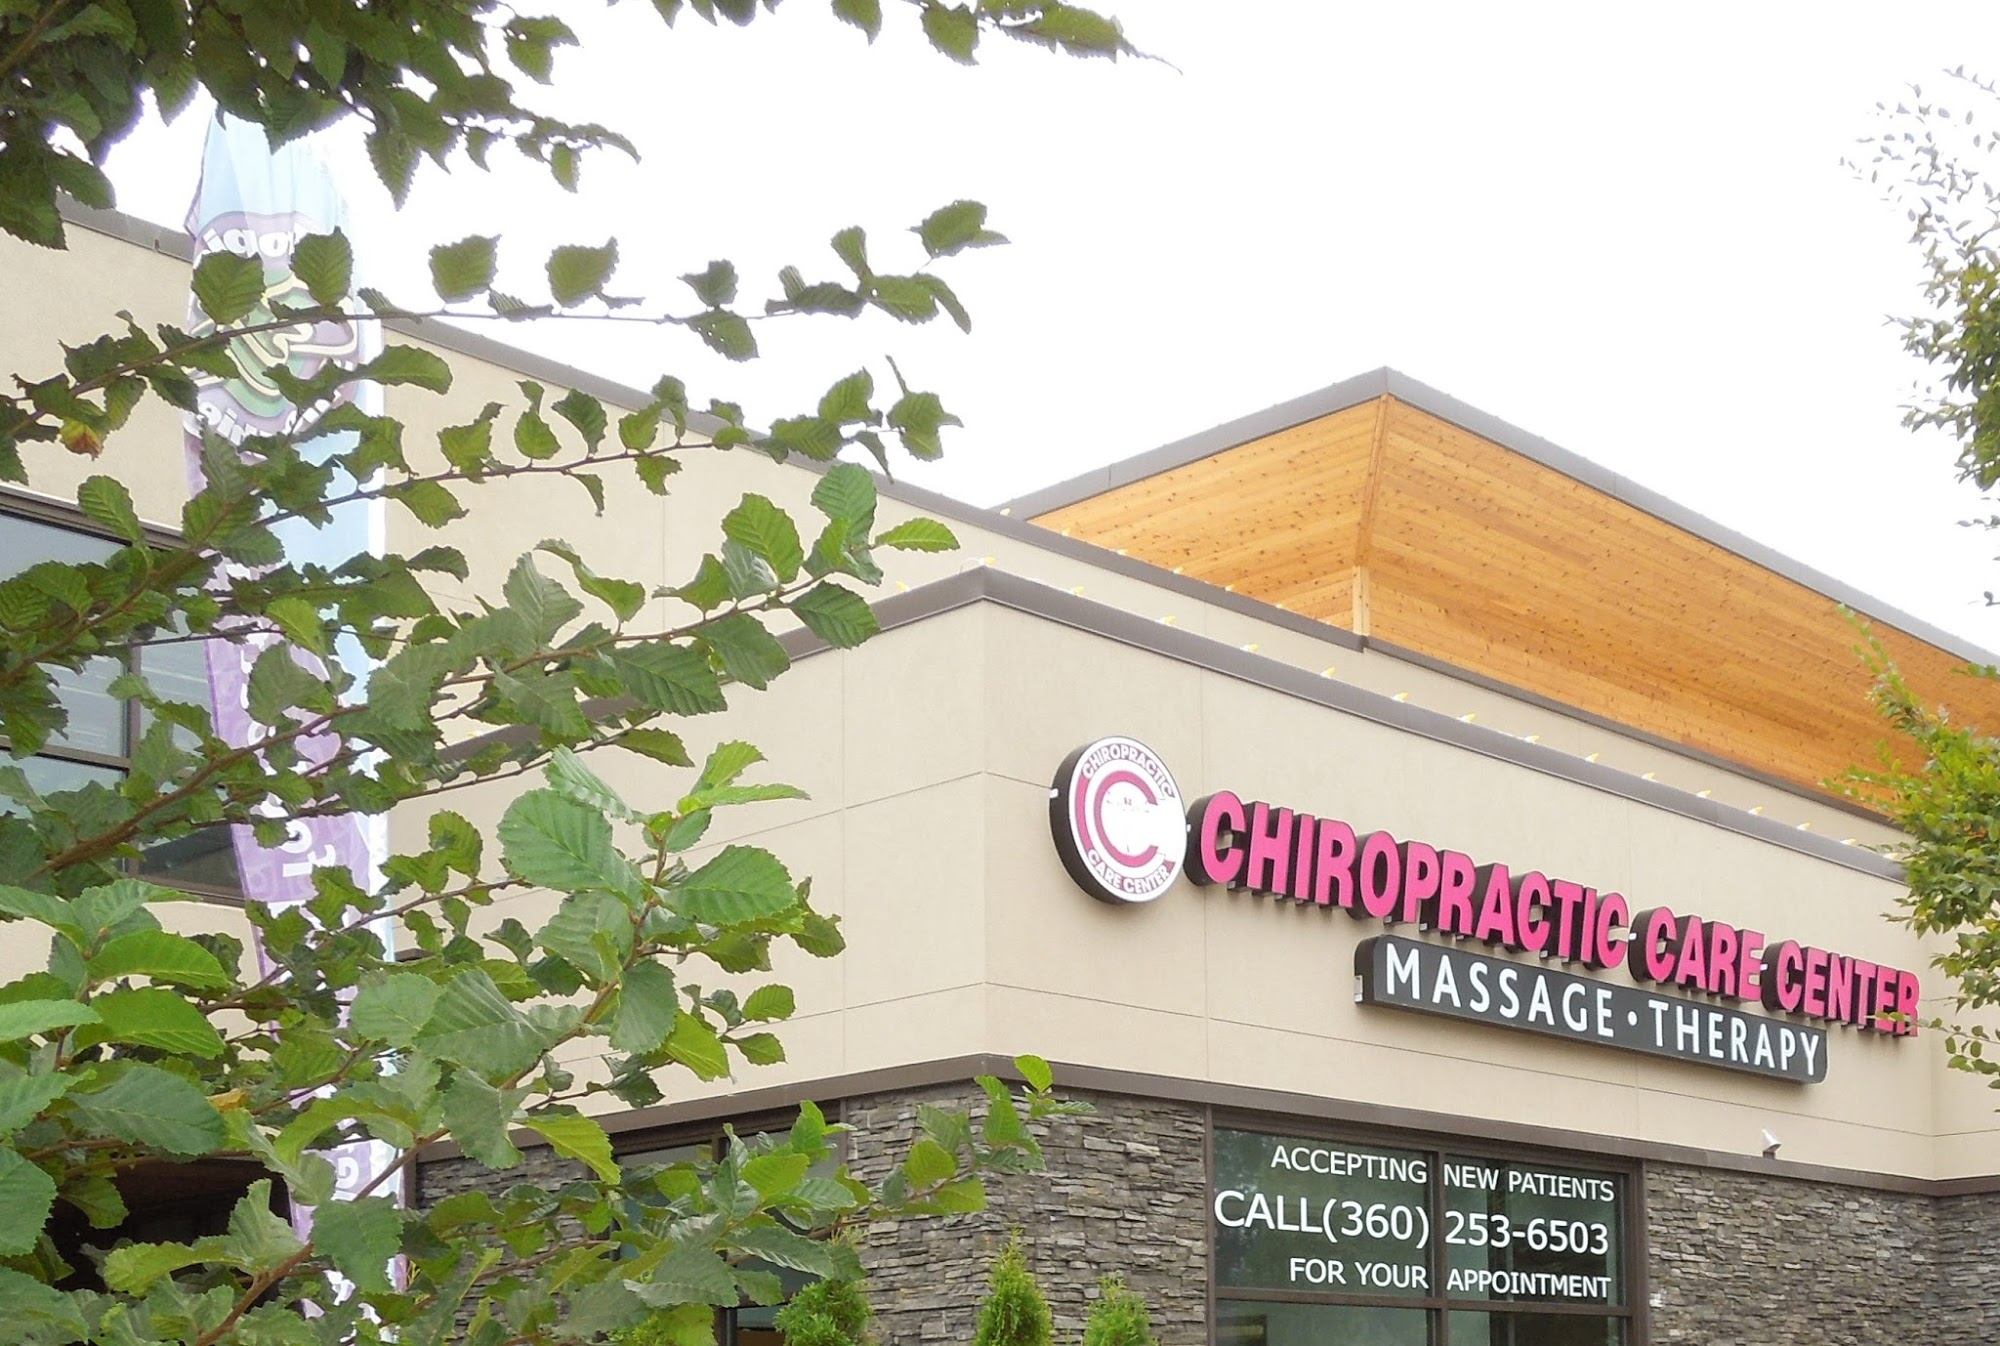 Chiropractic Care Center & Massage Therapy